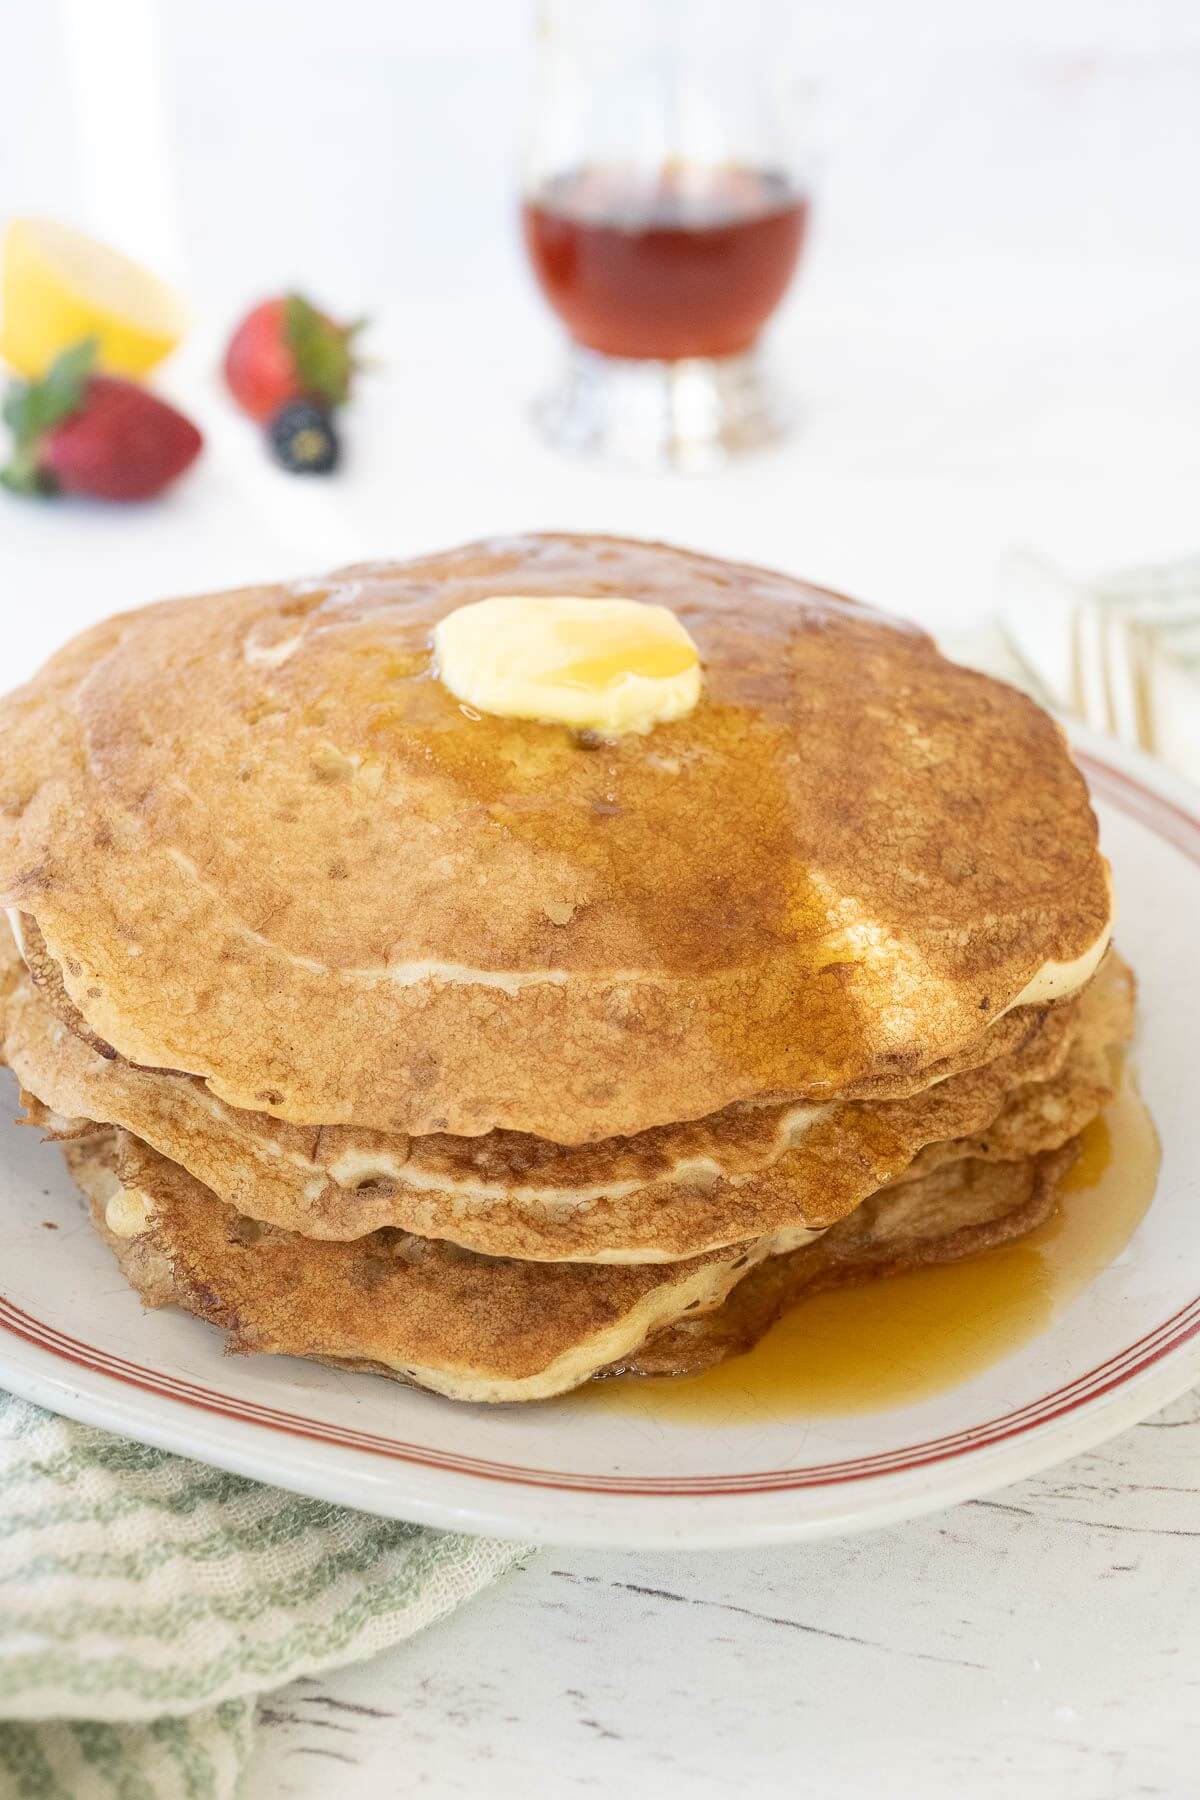 A thick stack of pancakes has a butter square melting on top.